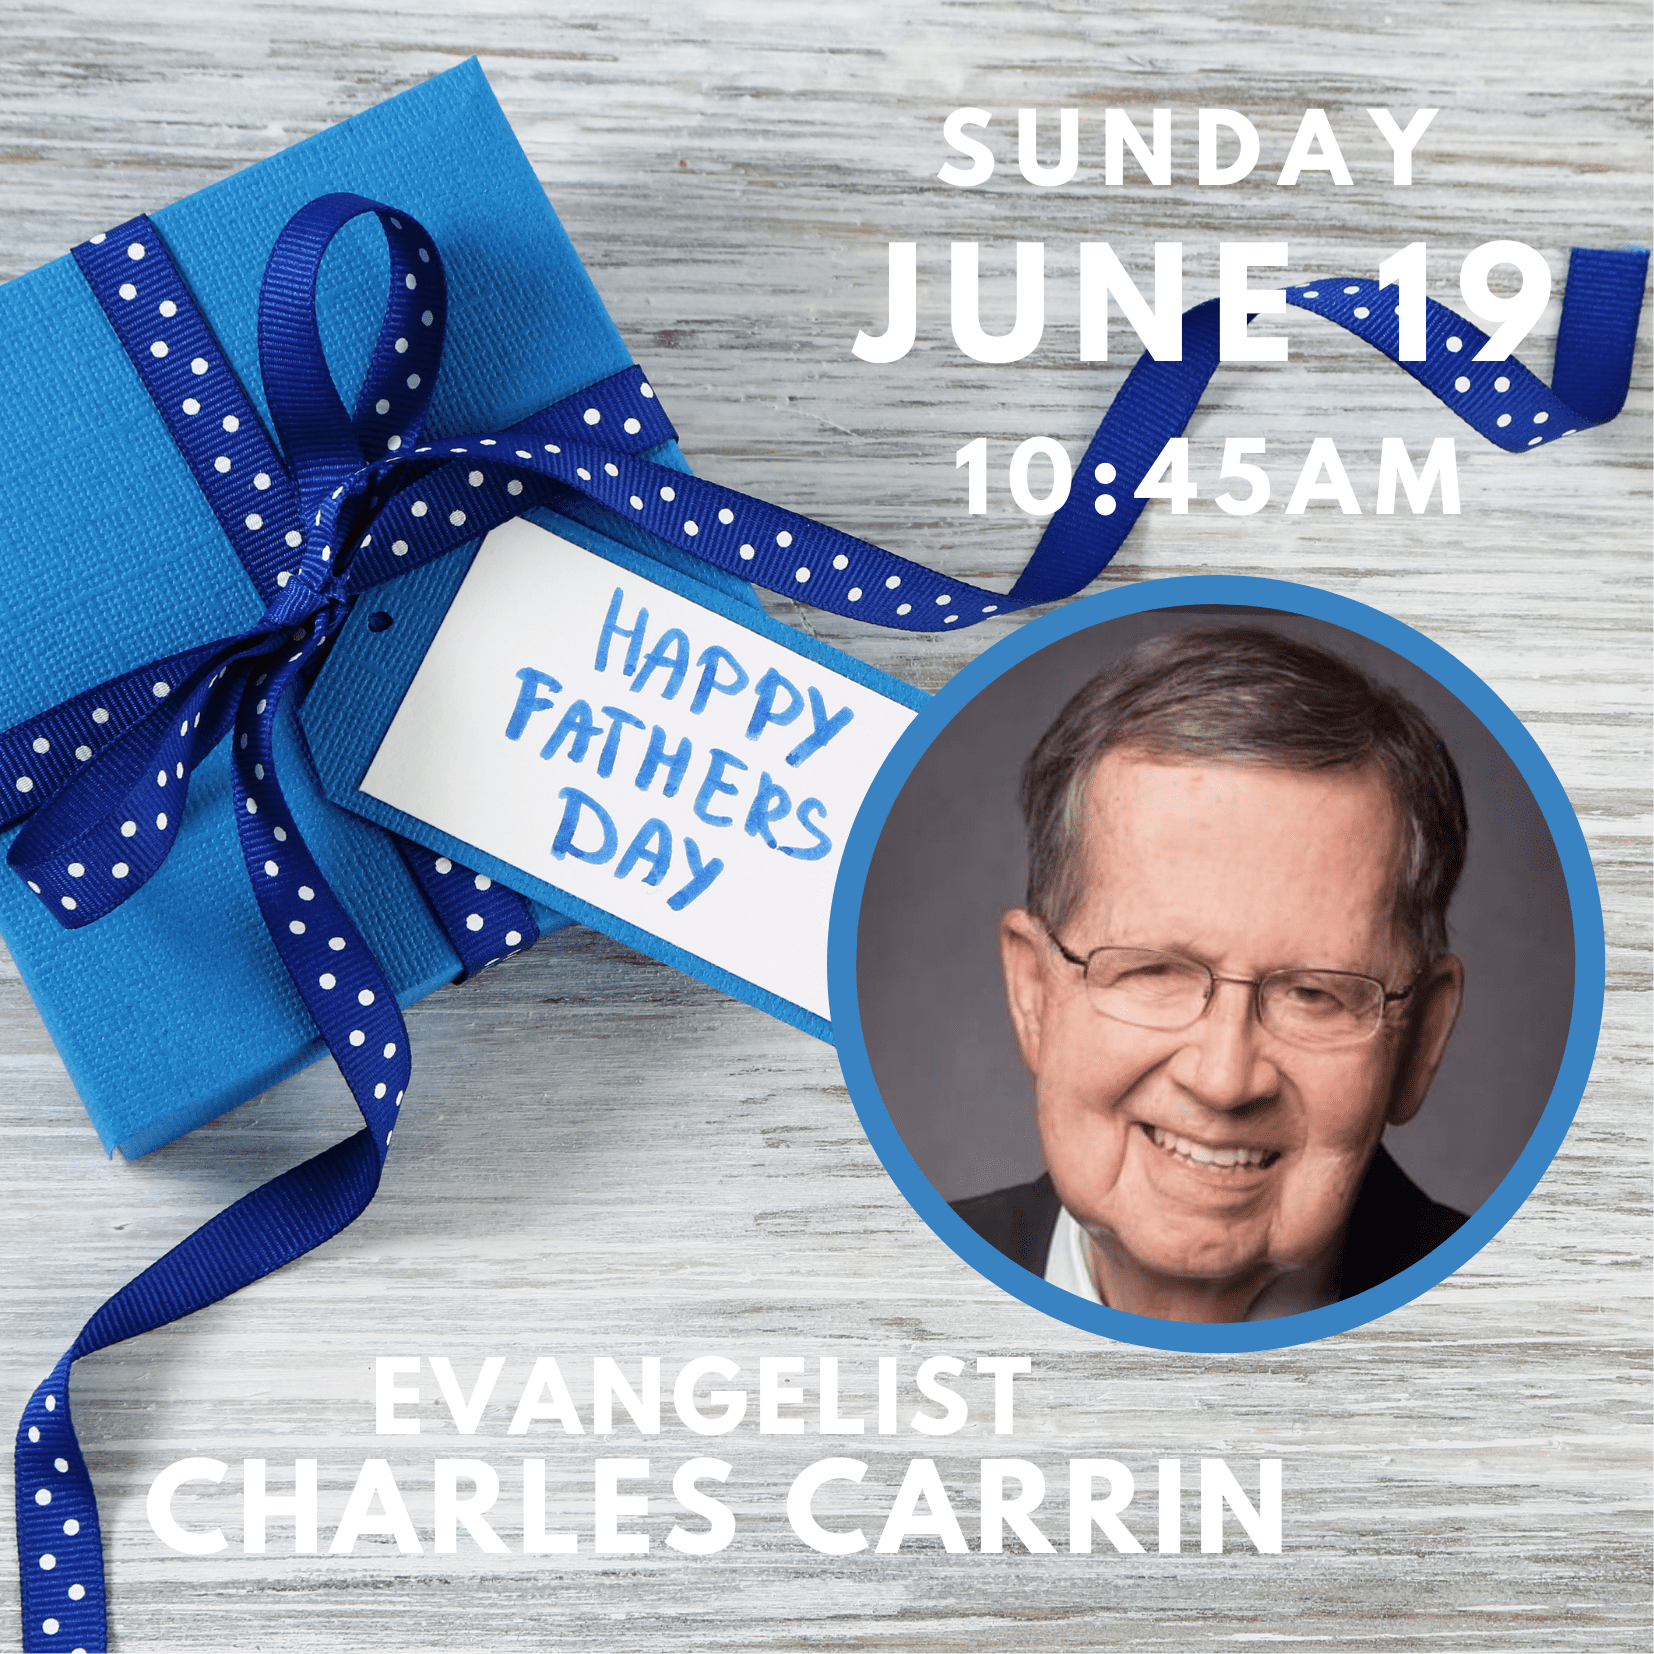 FATHER’S DAY SERVICE WITH EVANGELIST CHARLES CARRIN